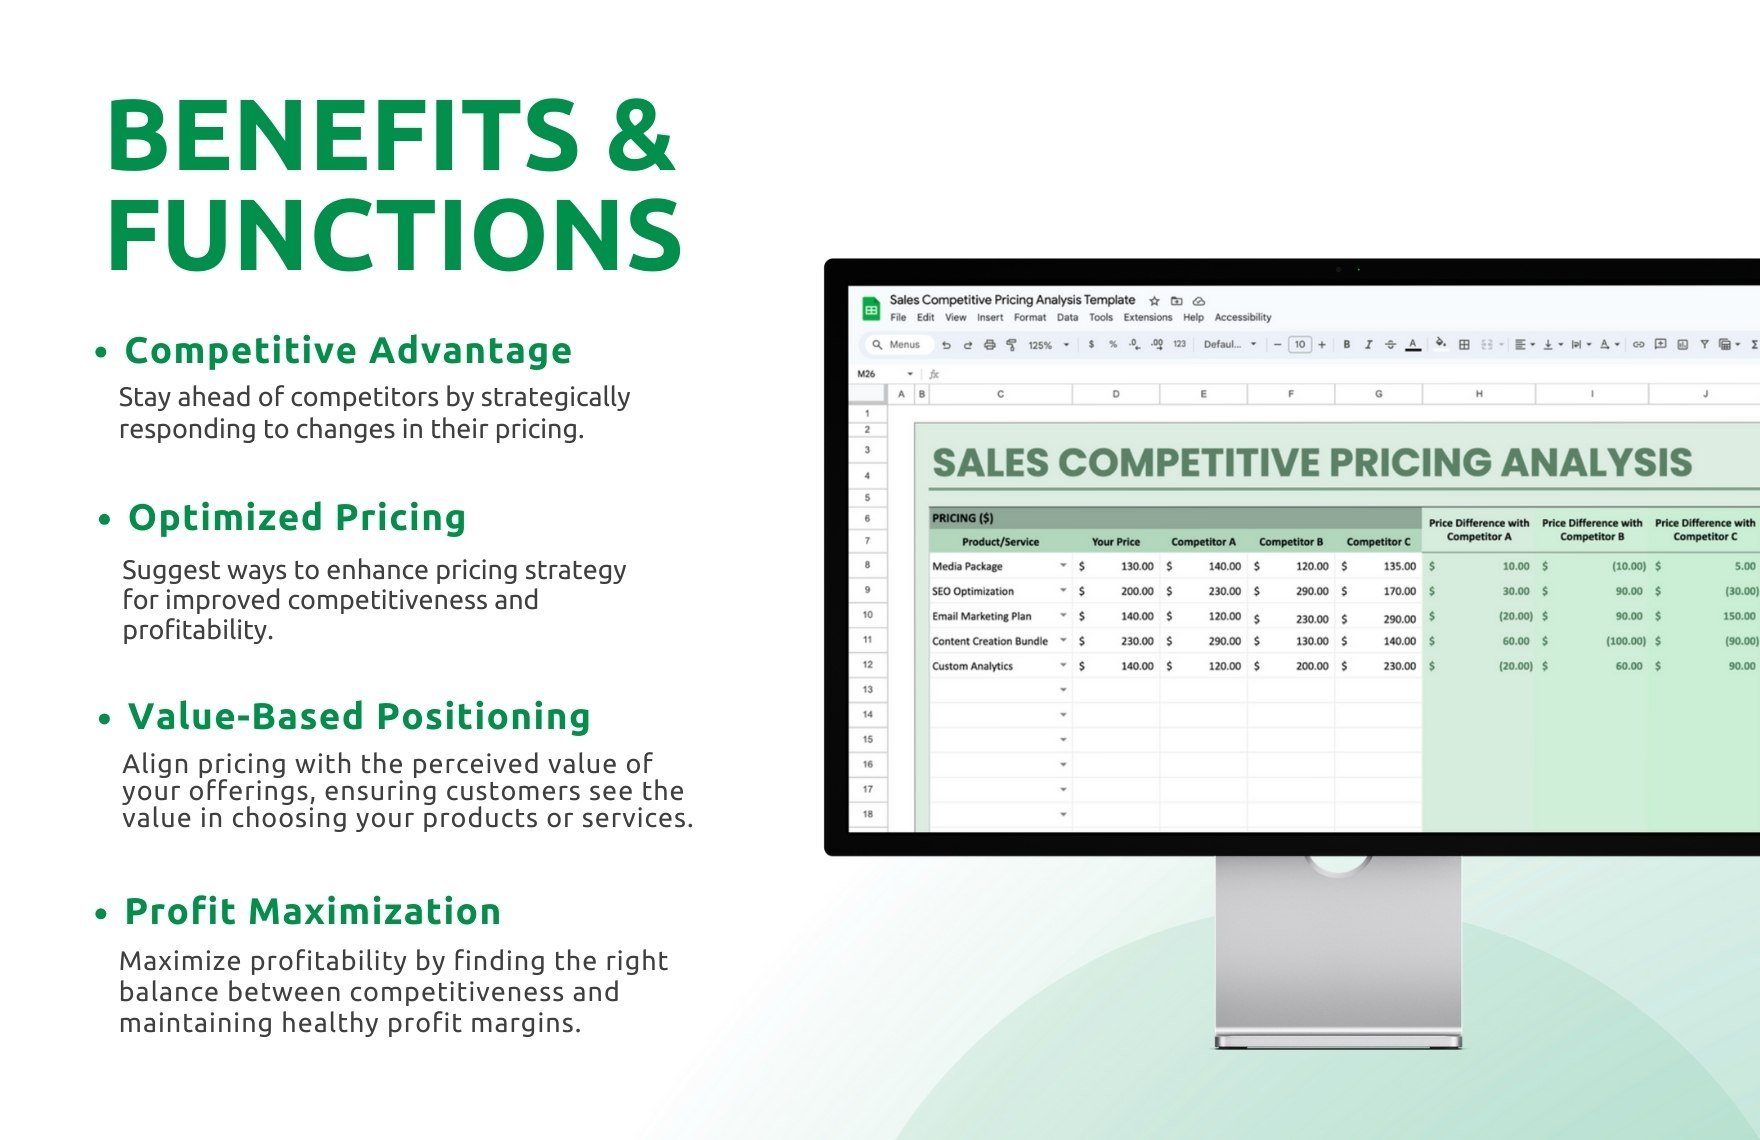 Sales Competitive Pricing Analysis Template